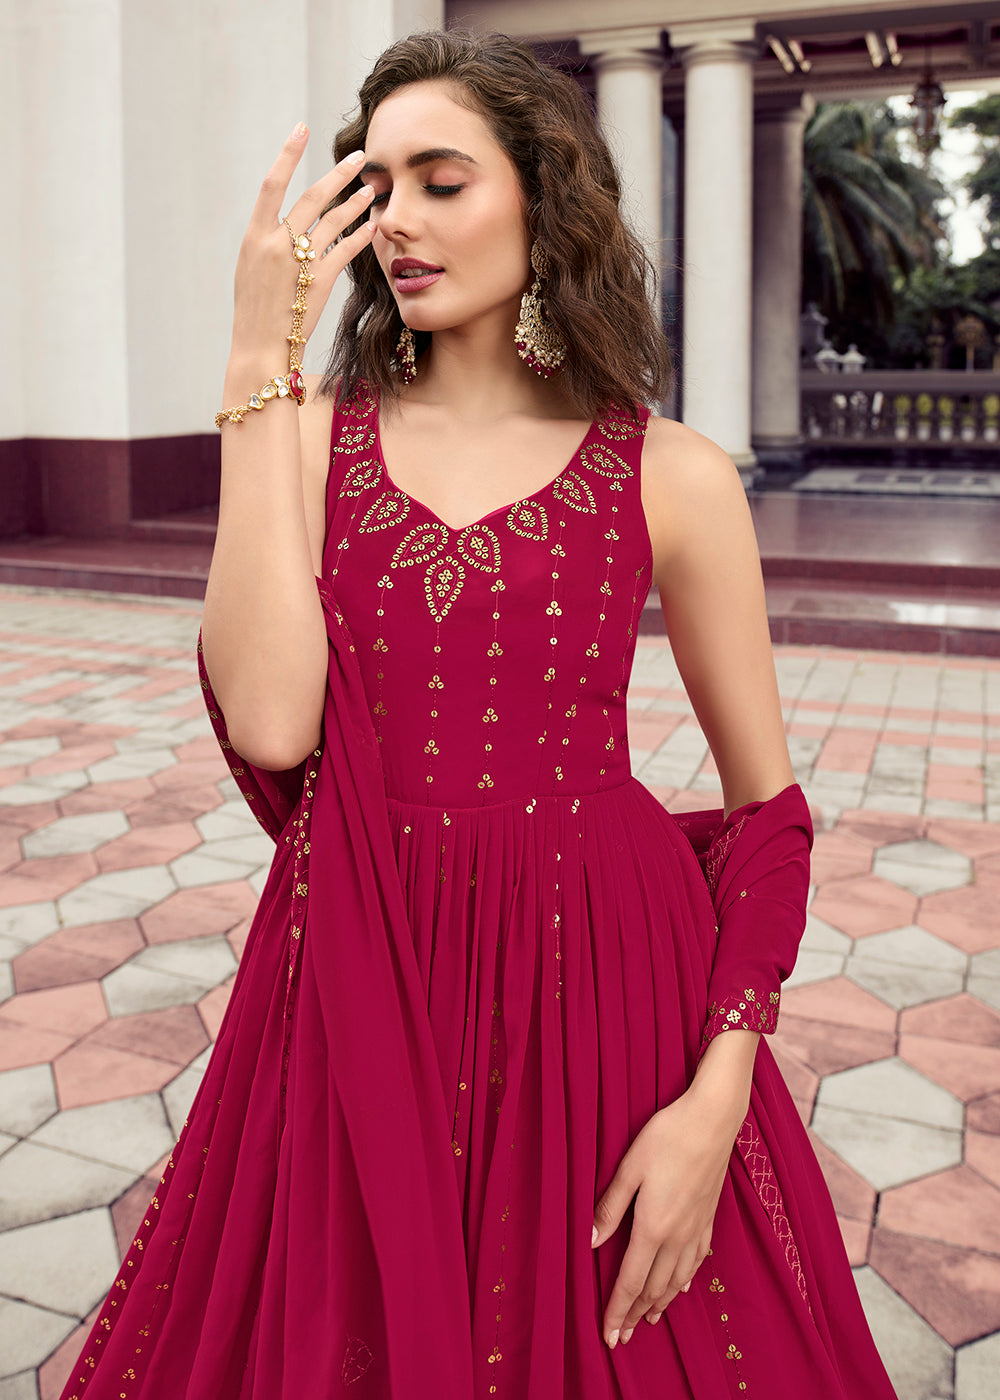 Buy Now Rani Pink Georgette Thread & Sequins Wedding Party Gown Online in USA, UK, Australia, New Zealand, Canada & Worldwide at Empress Clothing.